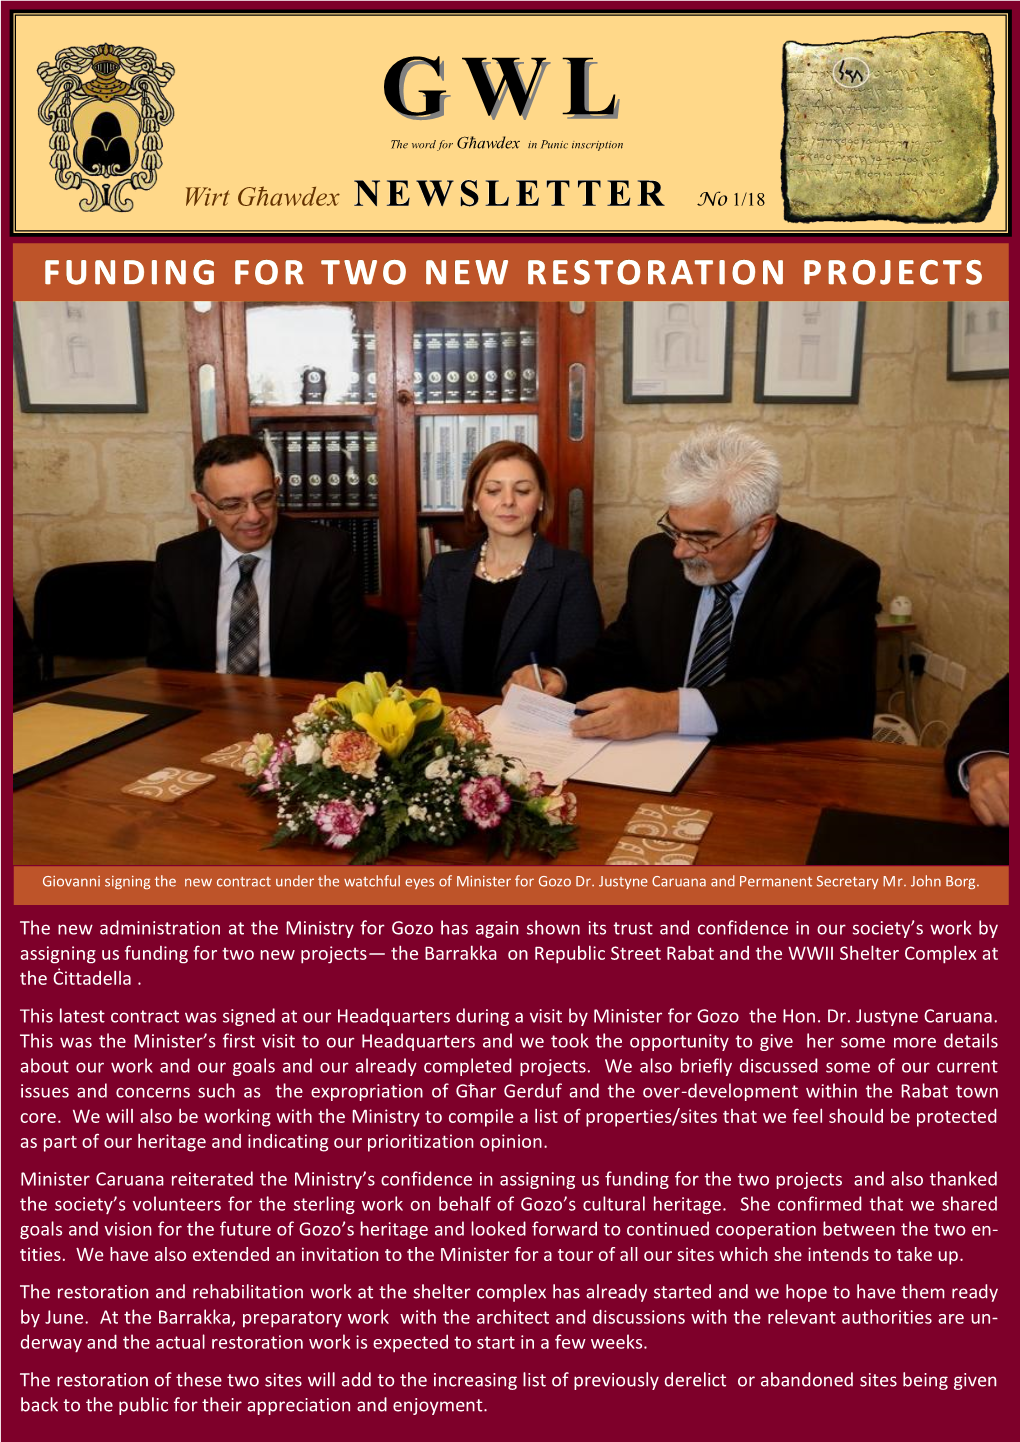 Funding for Two New Restoration Projects